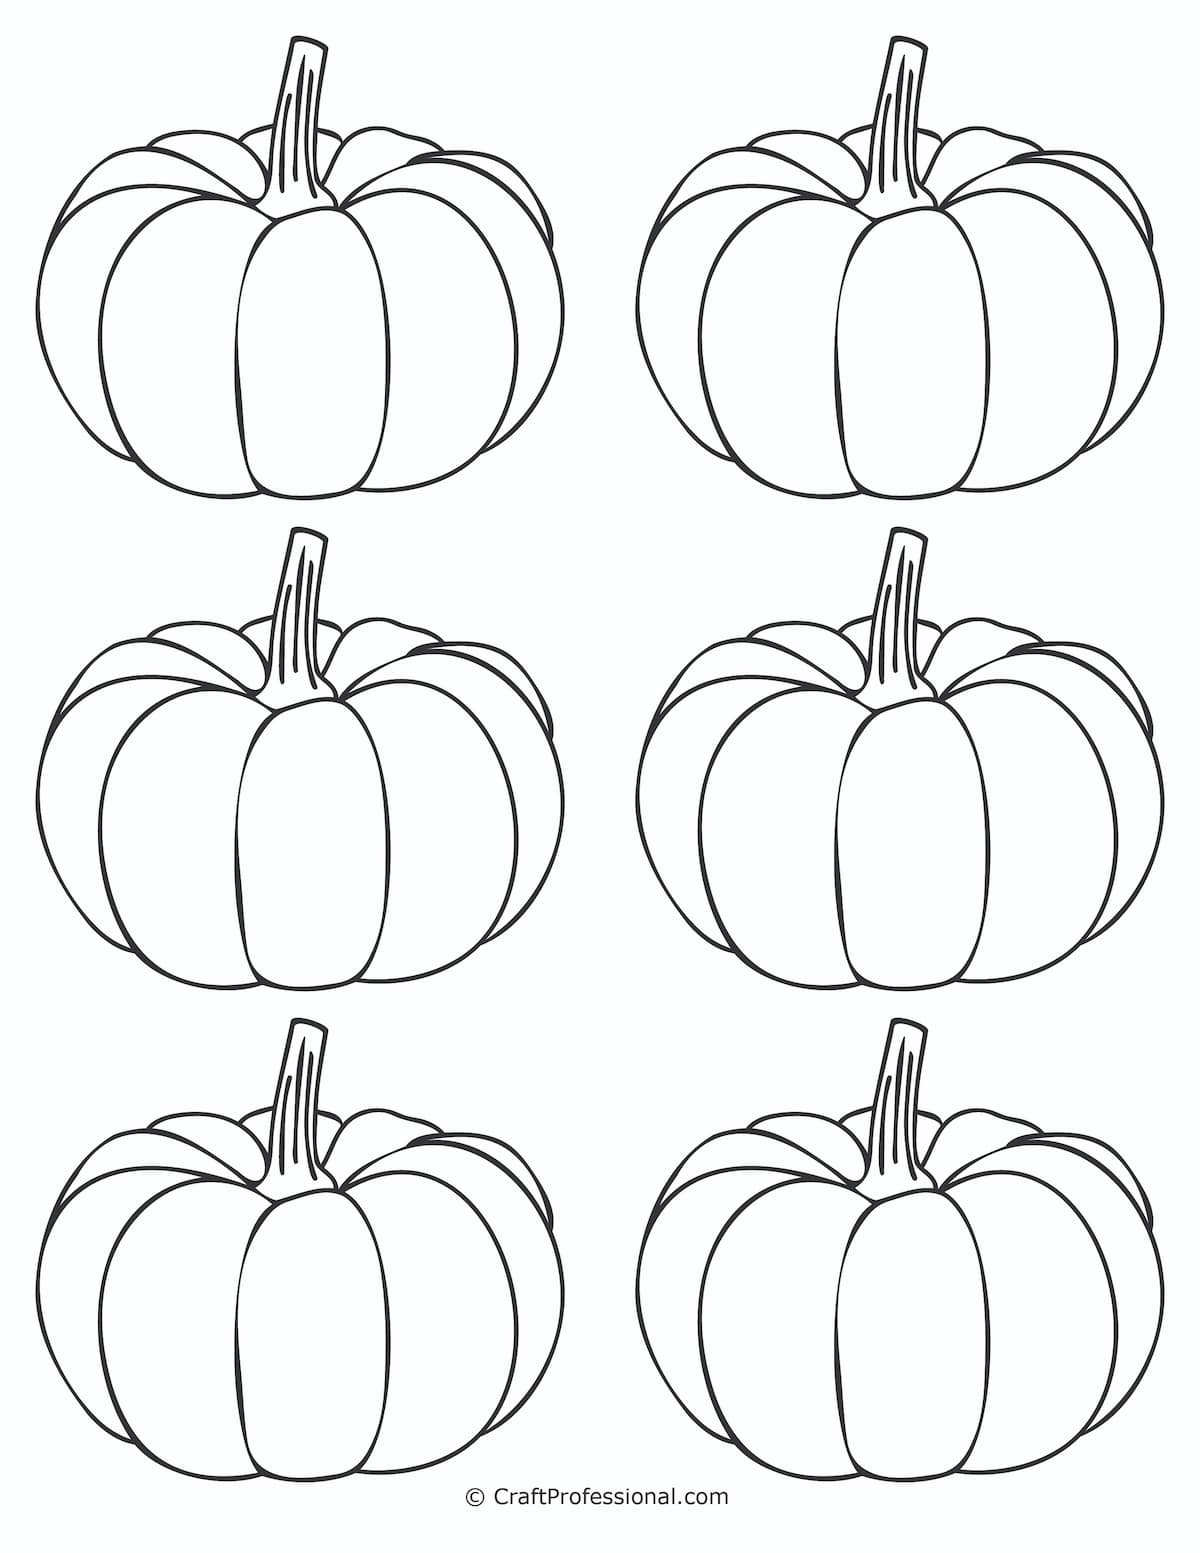 19-pumpkin-coloring-pages-free-printables-for-kids-adults-to-color